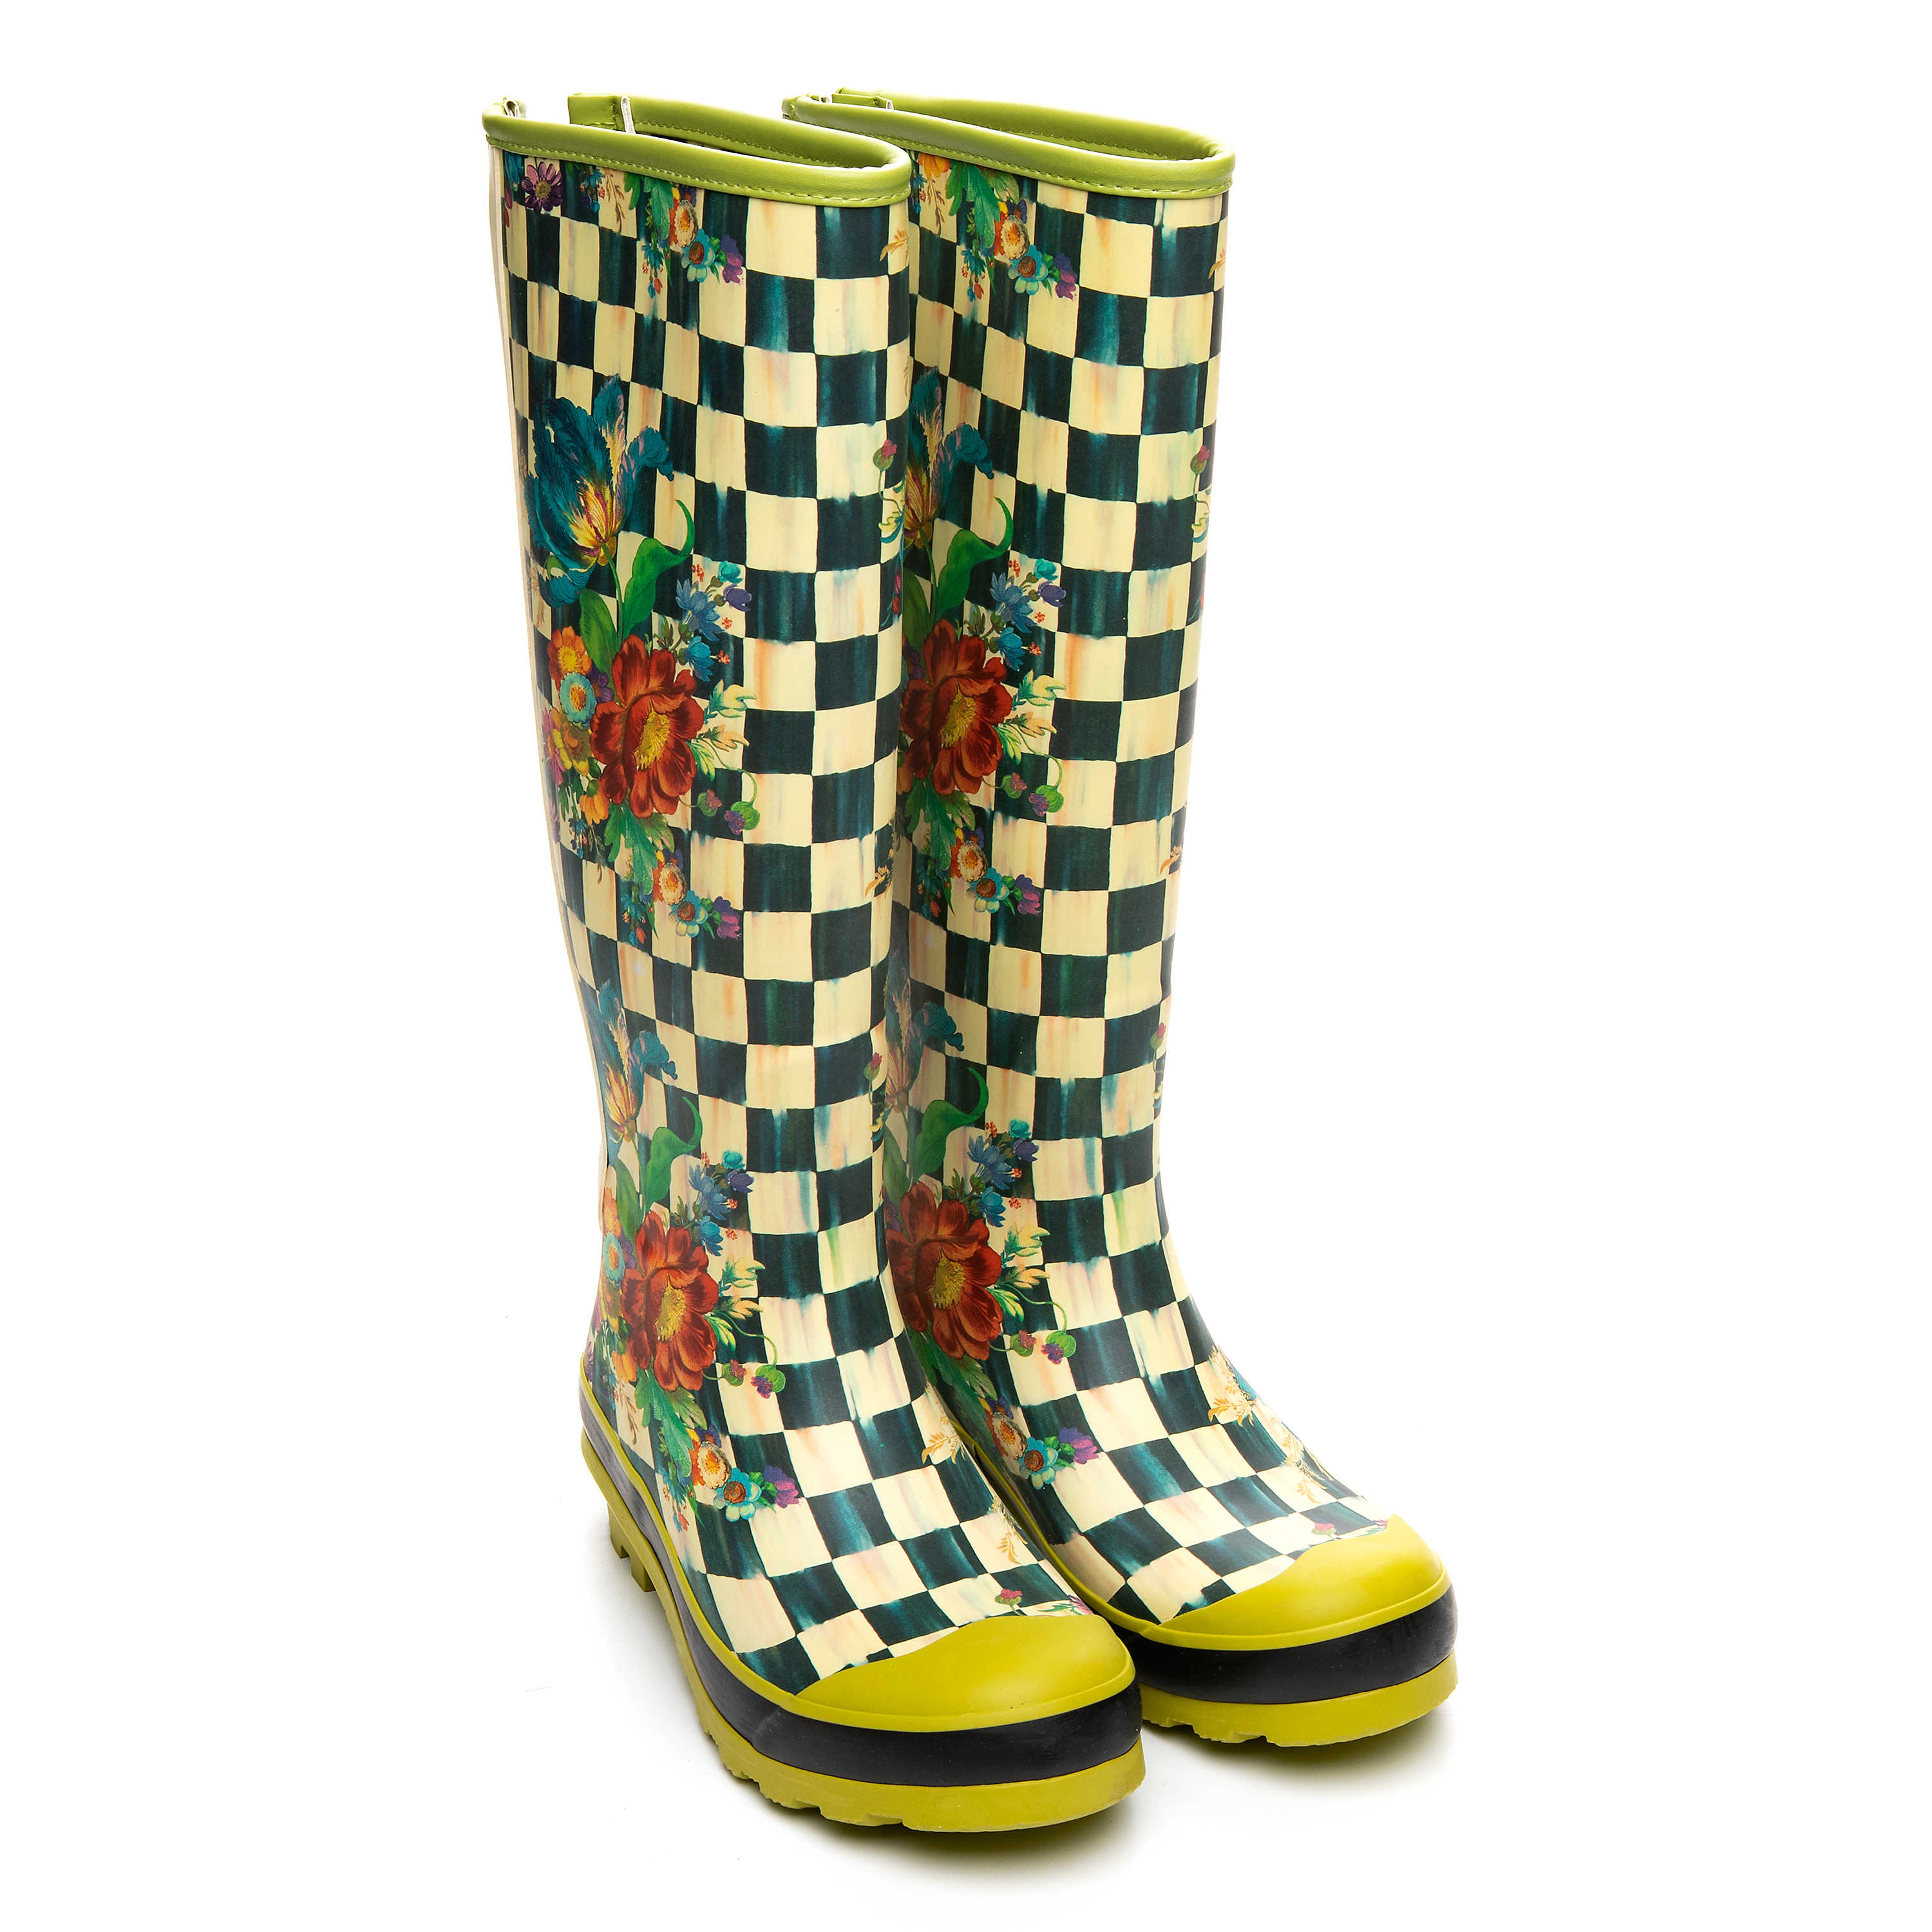 Courtly Check Rain Boots - Tall - Size 5 mackenzie-childs Panama 0